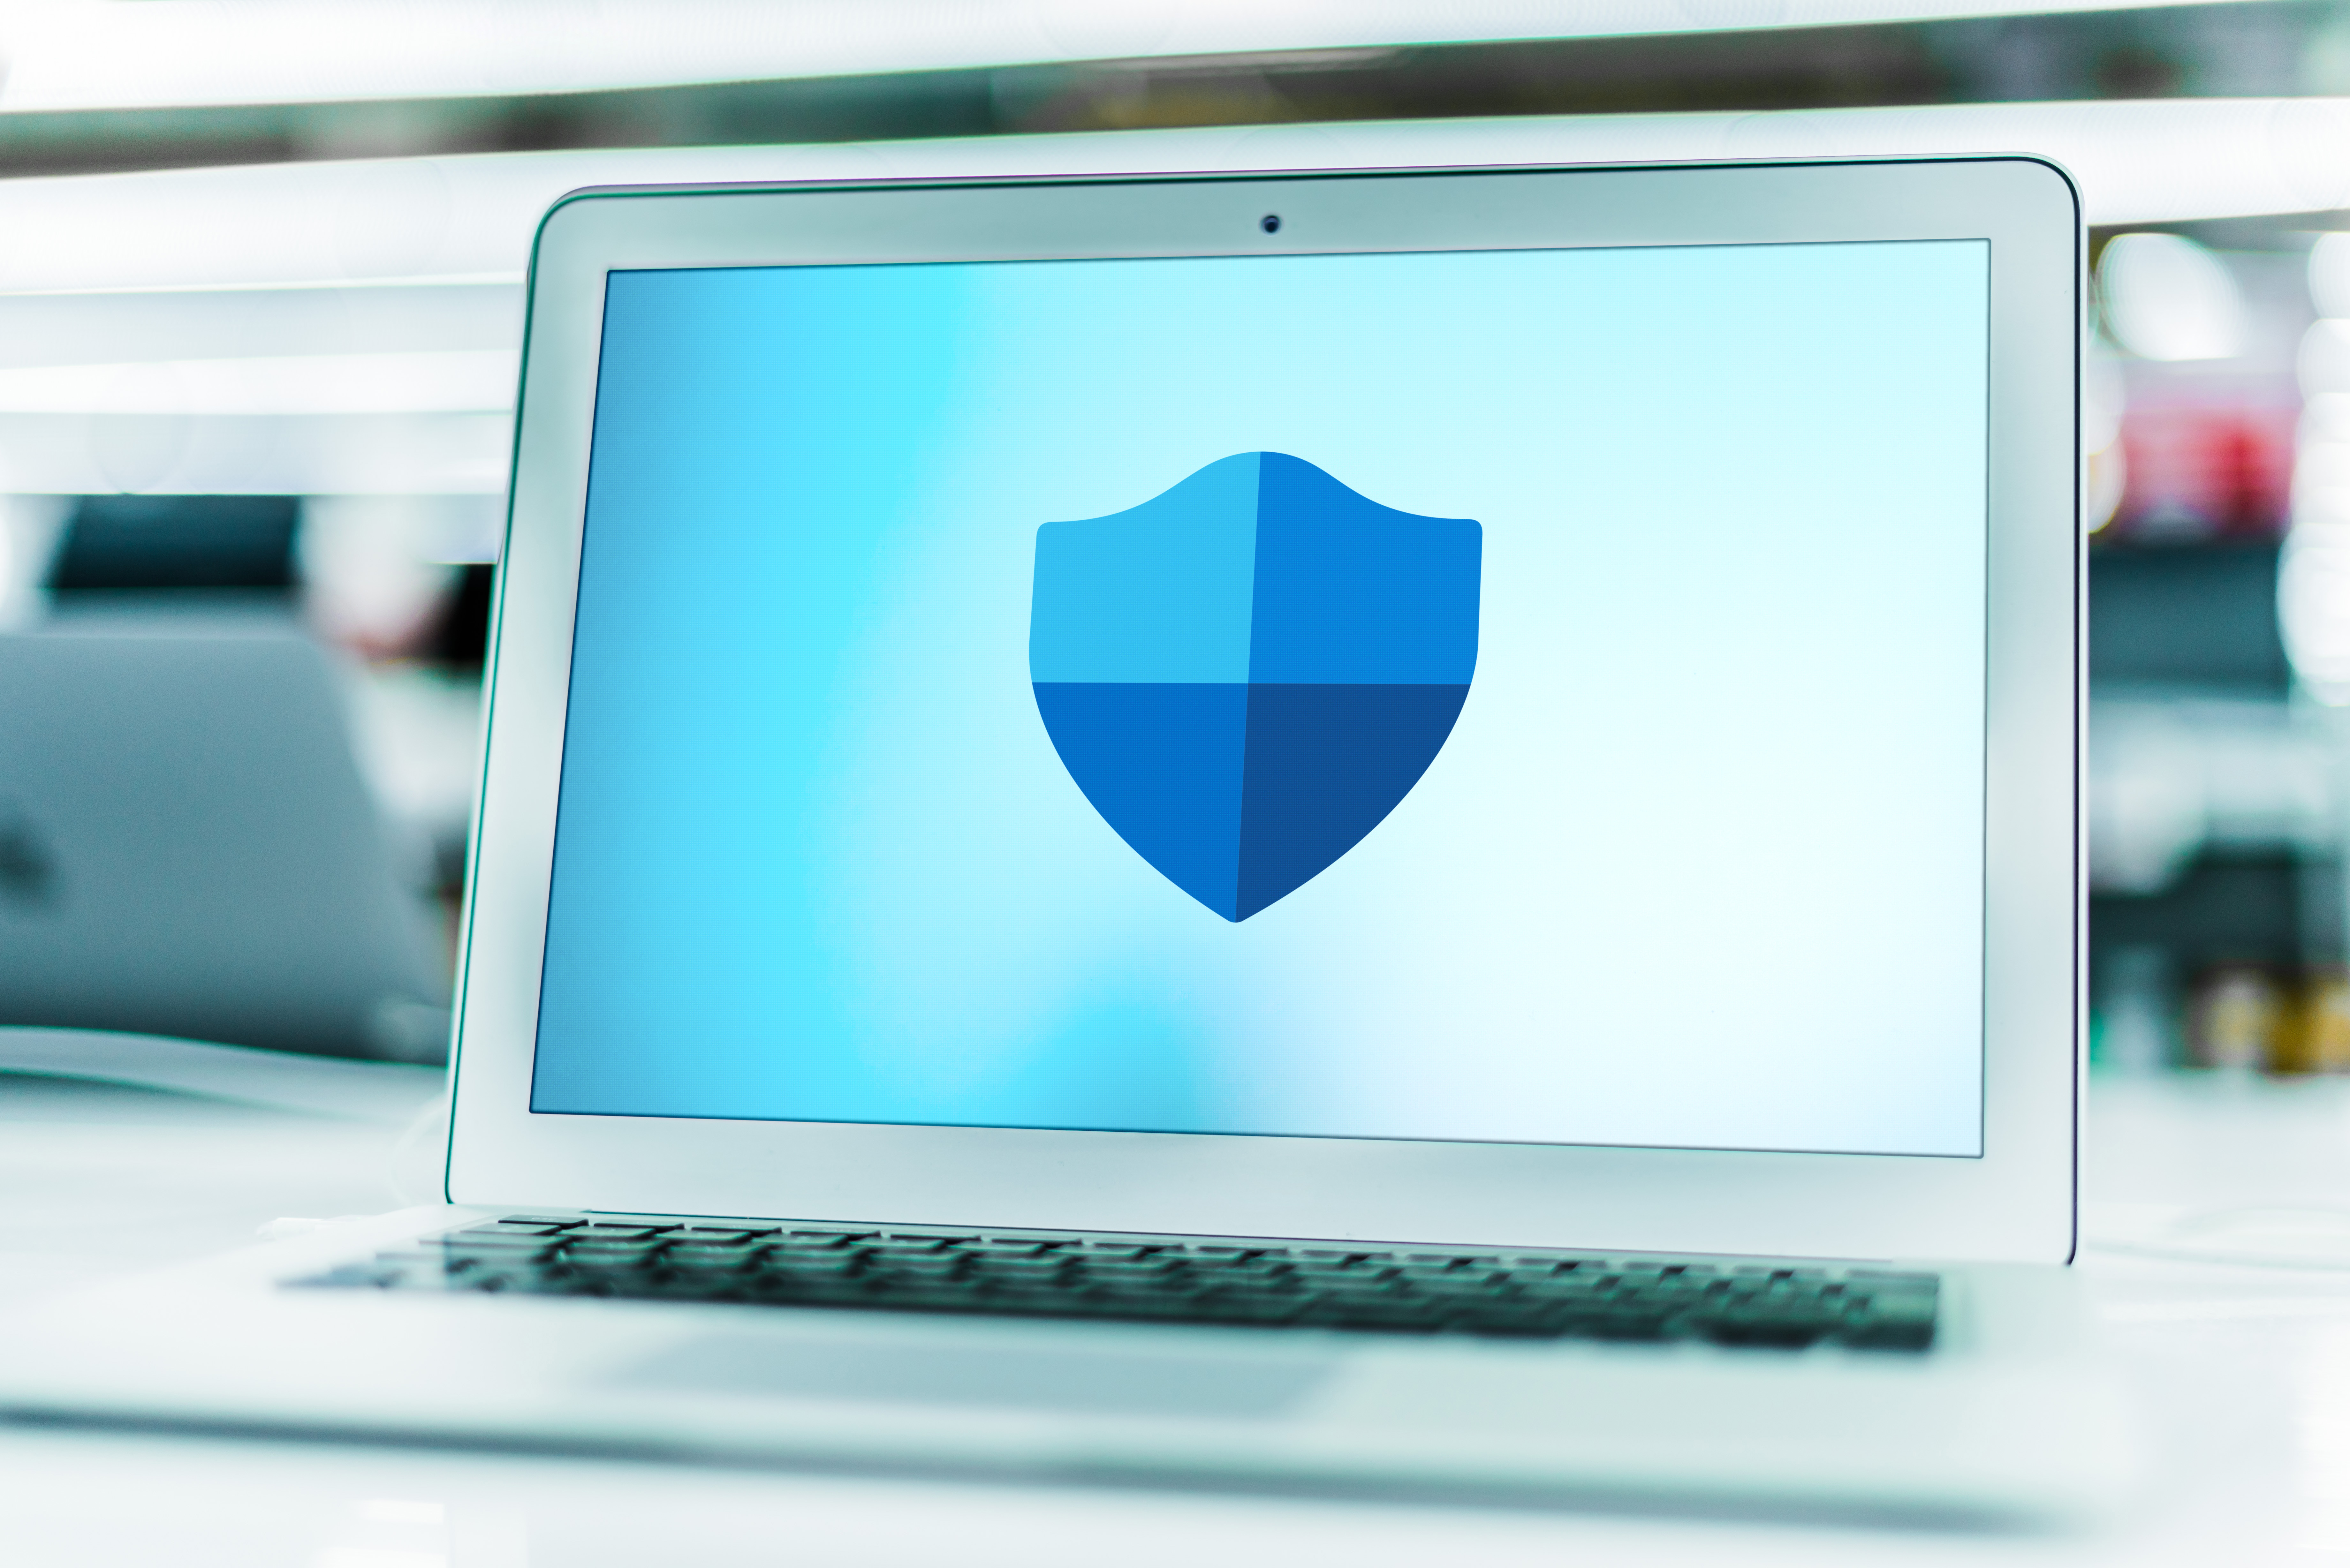 Read full post: How to Use Windows Defender to Improve Your Cybersecurity Posture